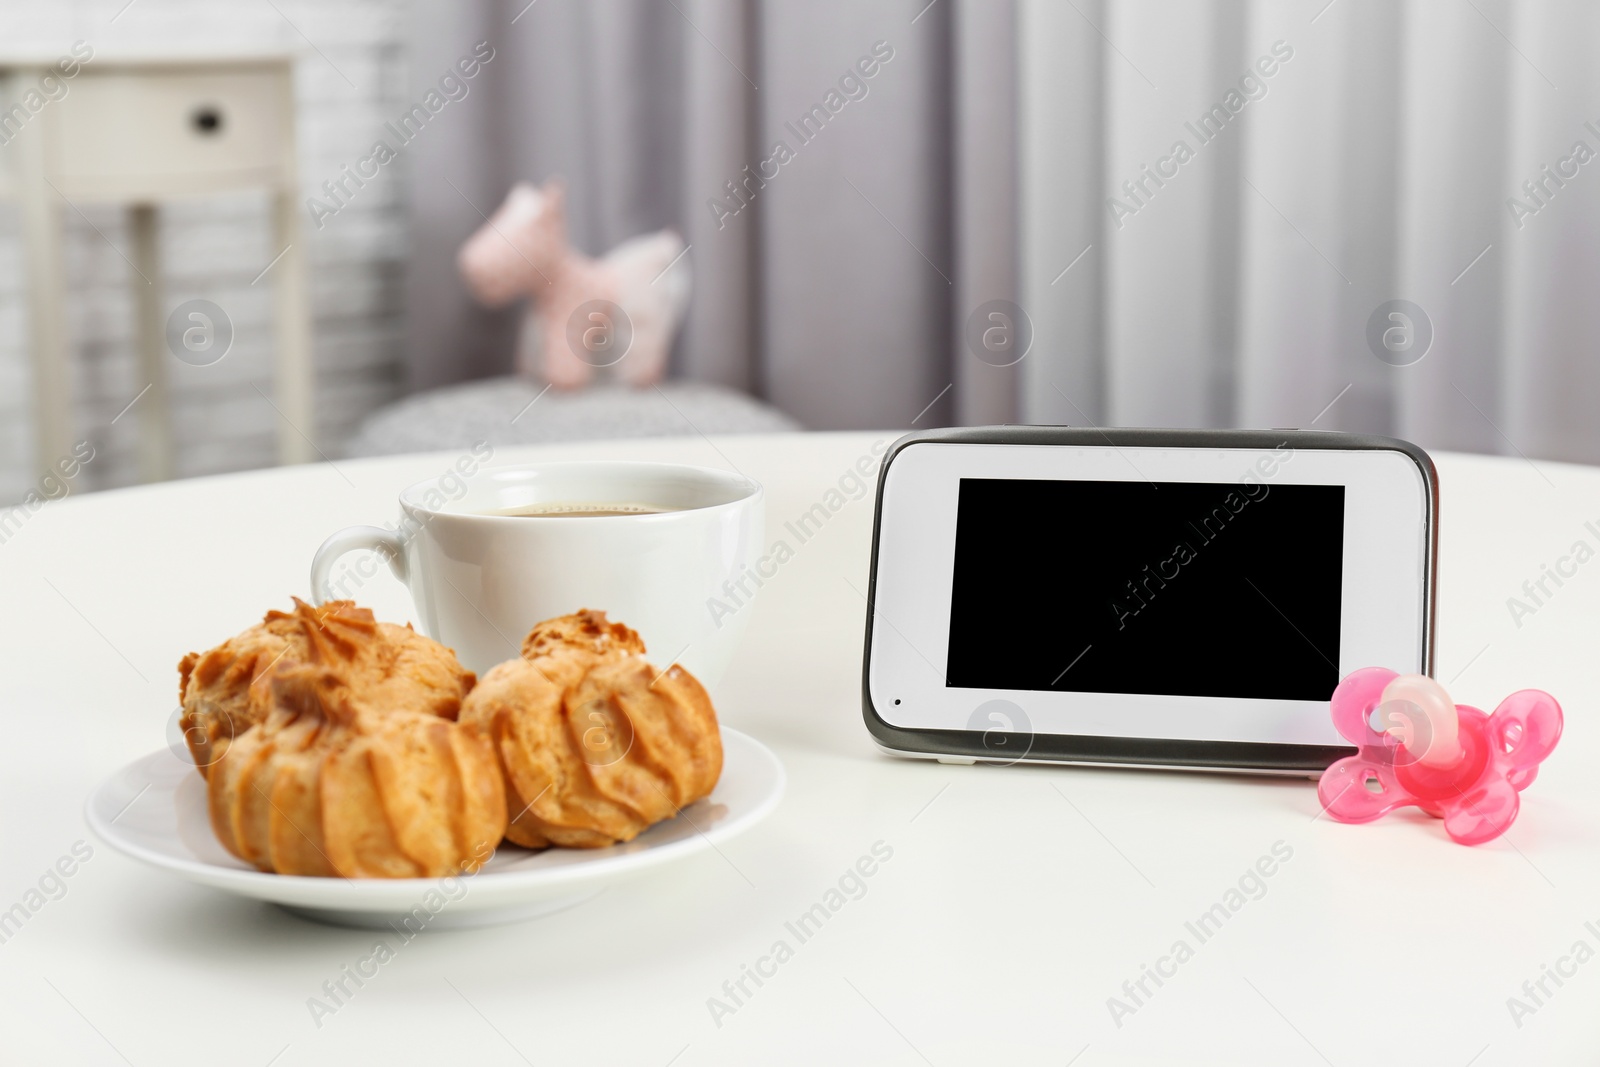 Photo of Modern monitor, cup of coffee, cookies and pacifier on table indoors, space for text. CCTV equipment